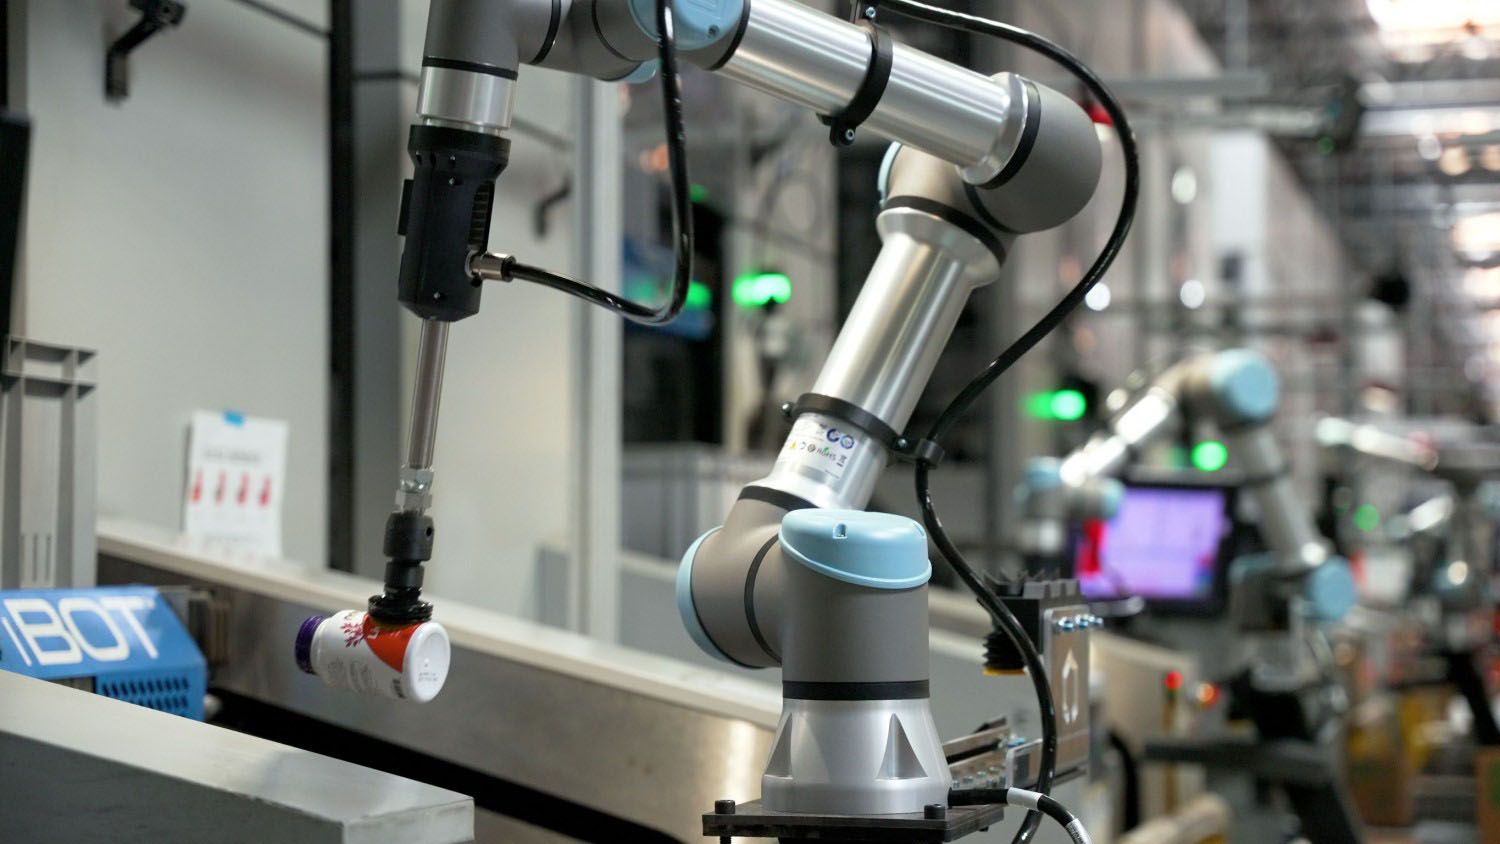 Nimble robots are being used to realize “goods-to-robot” efficiencies.